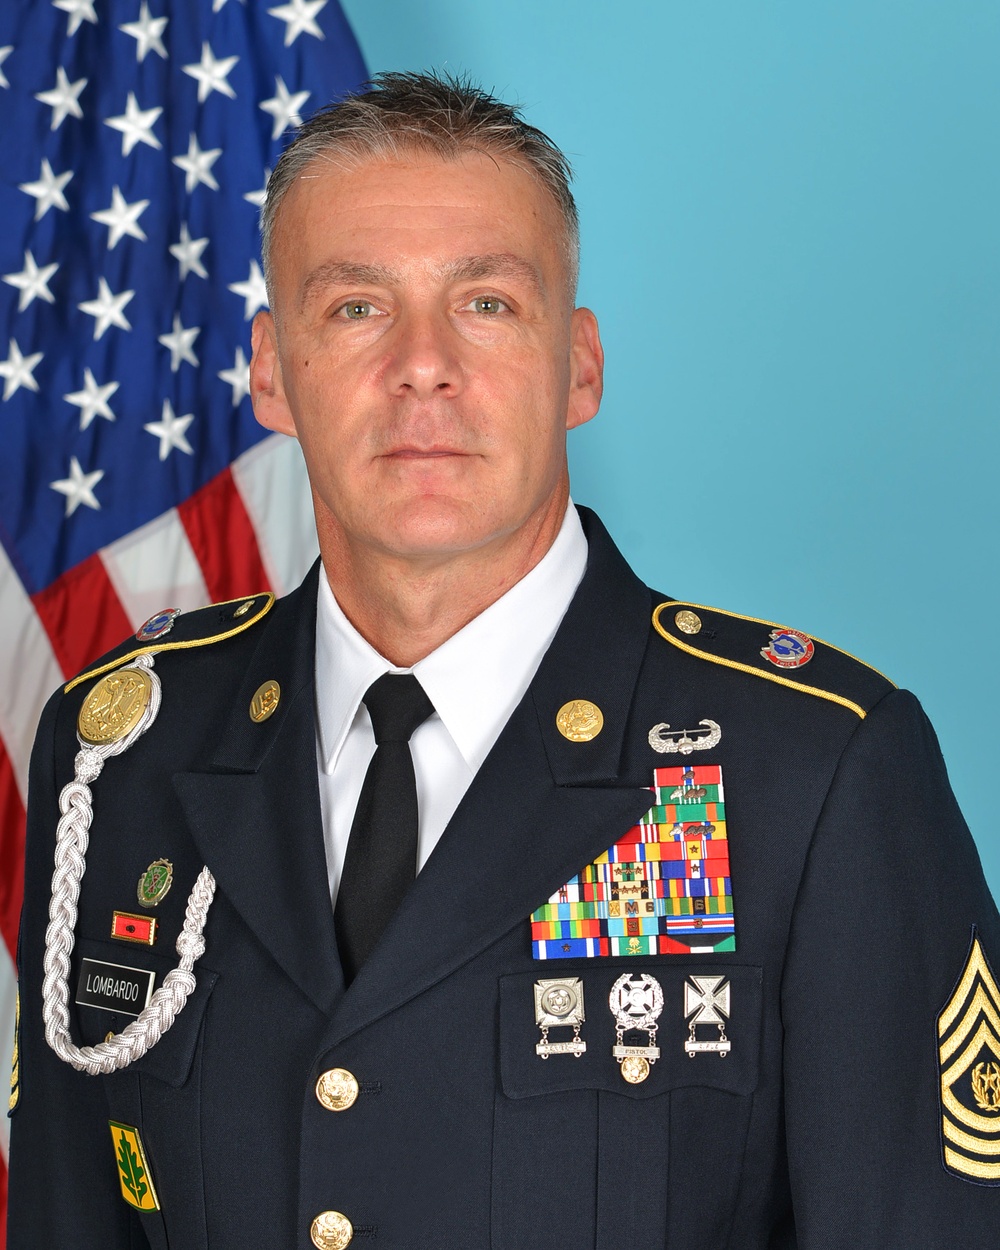 Andrew Lombardo selected as 14th Command Sergeant Major of the  Army Reserve